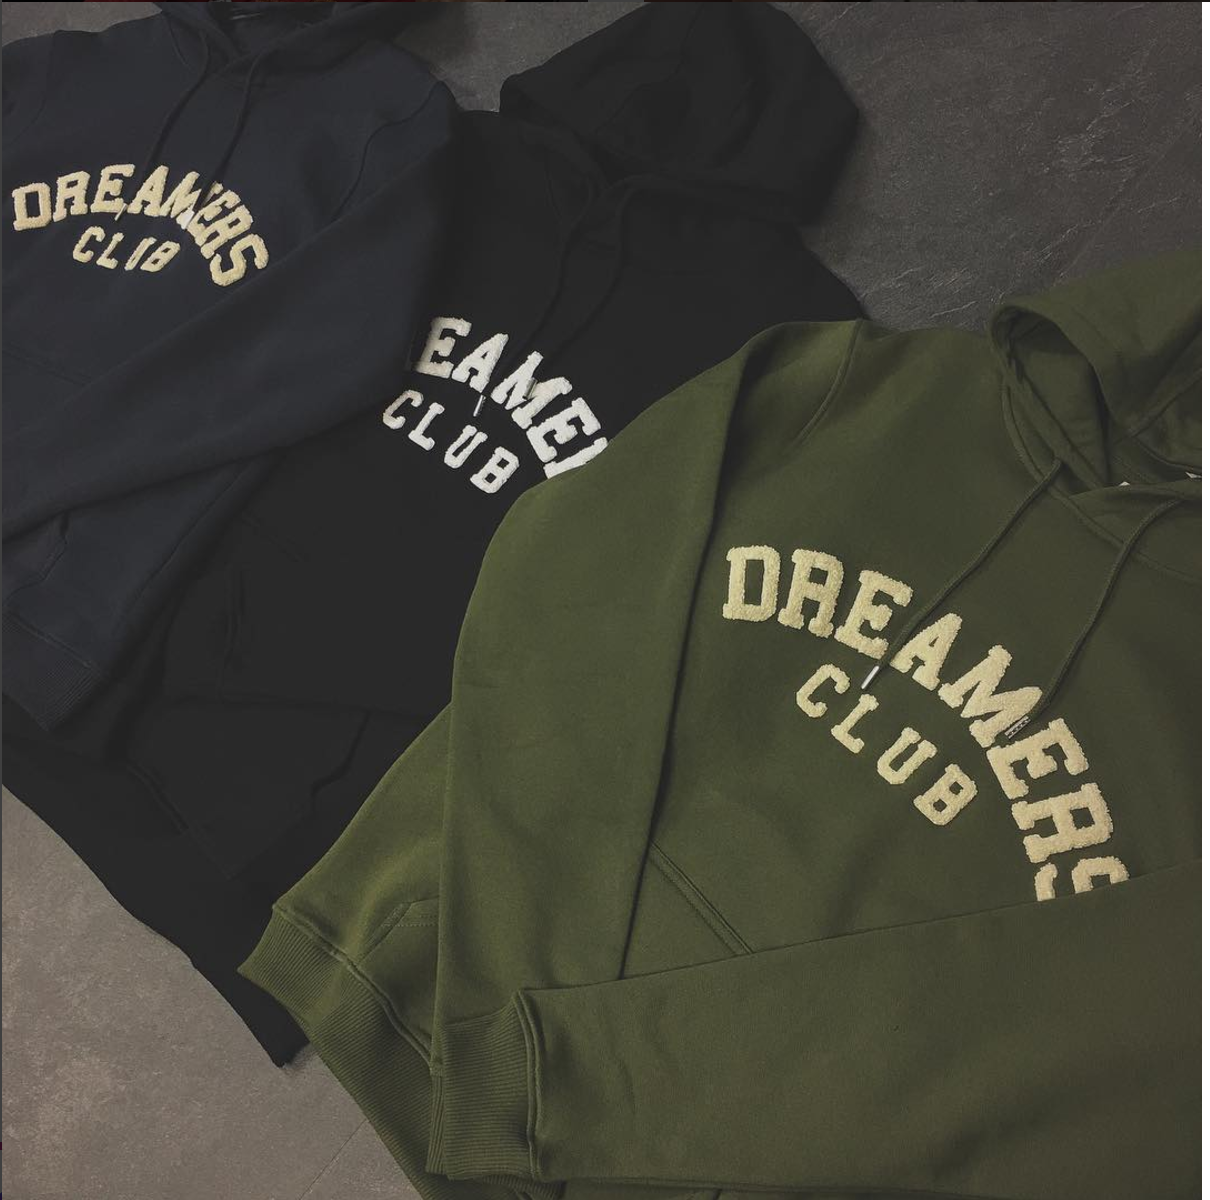 Introducing: Dreamers Club - Inspirational Streetwear - Trapped